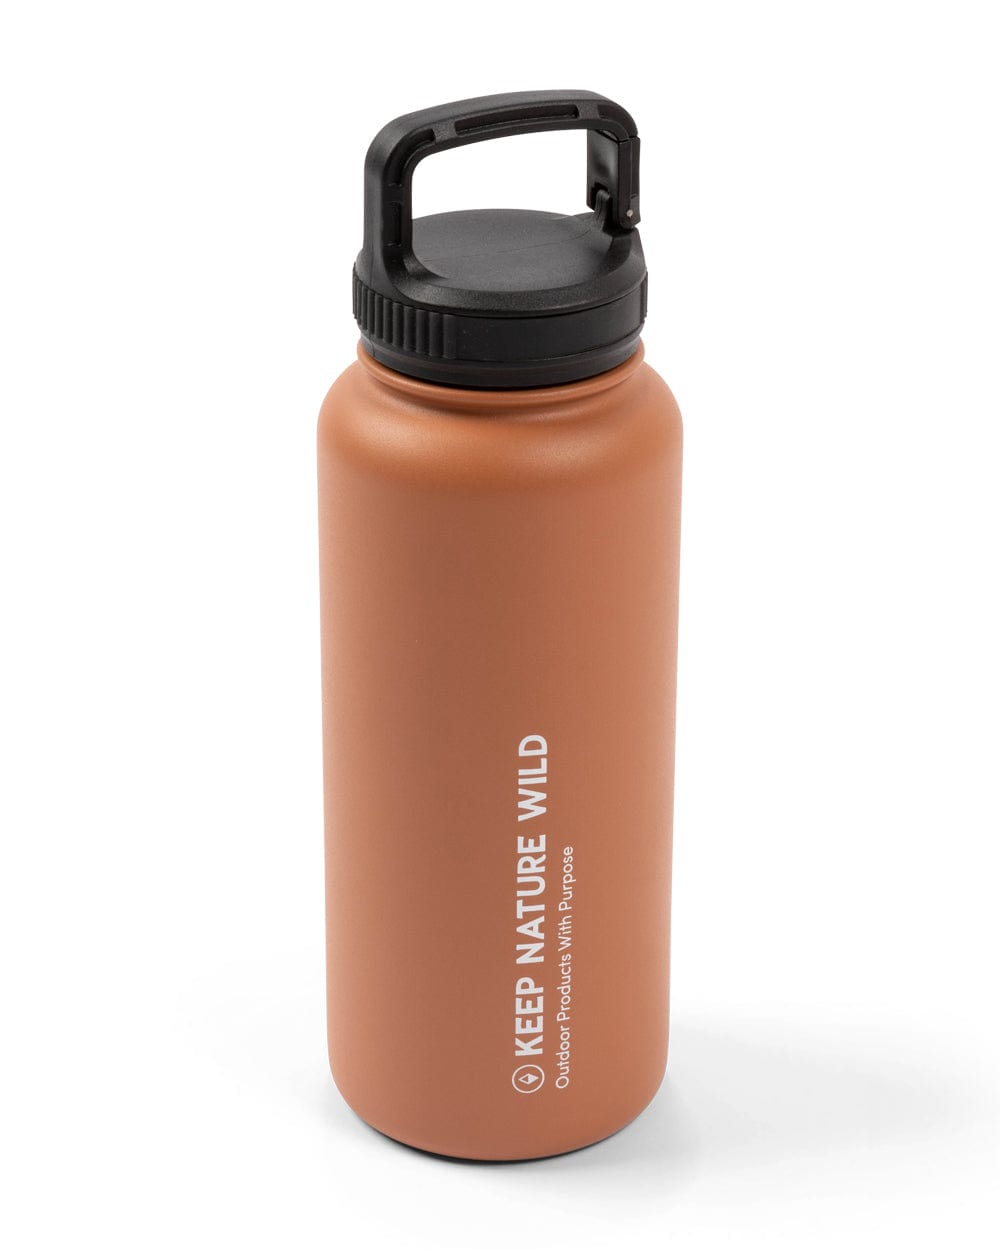 Keep Nature Wild Reusables Insulated 32oz Water Bottle with Handle Clip | Red Rock